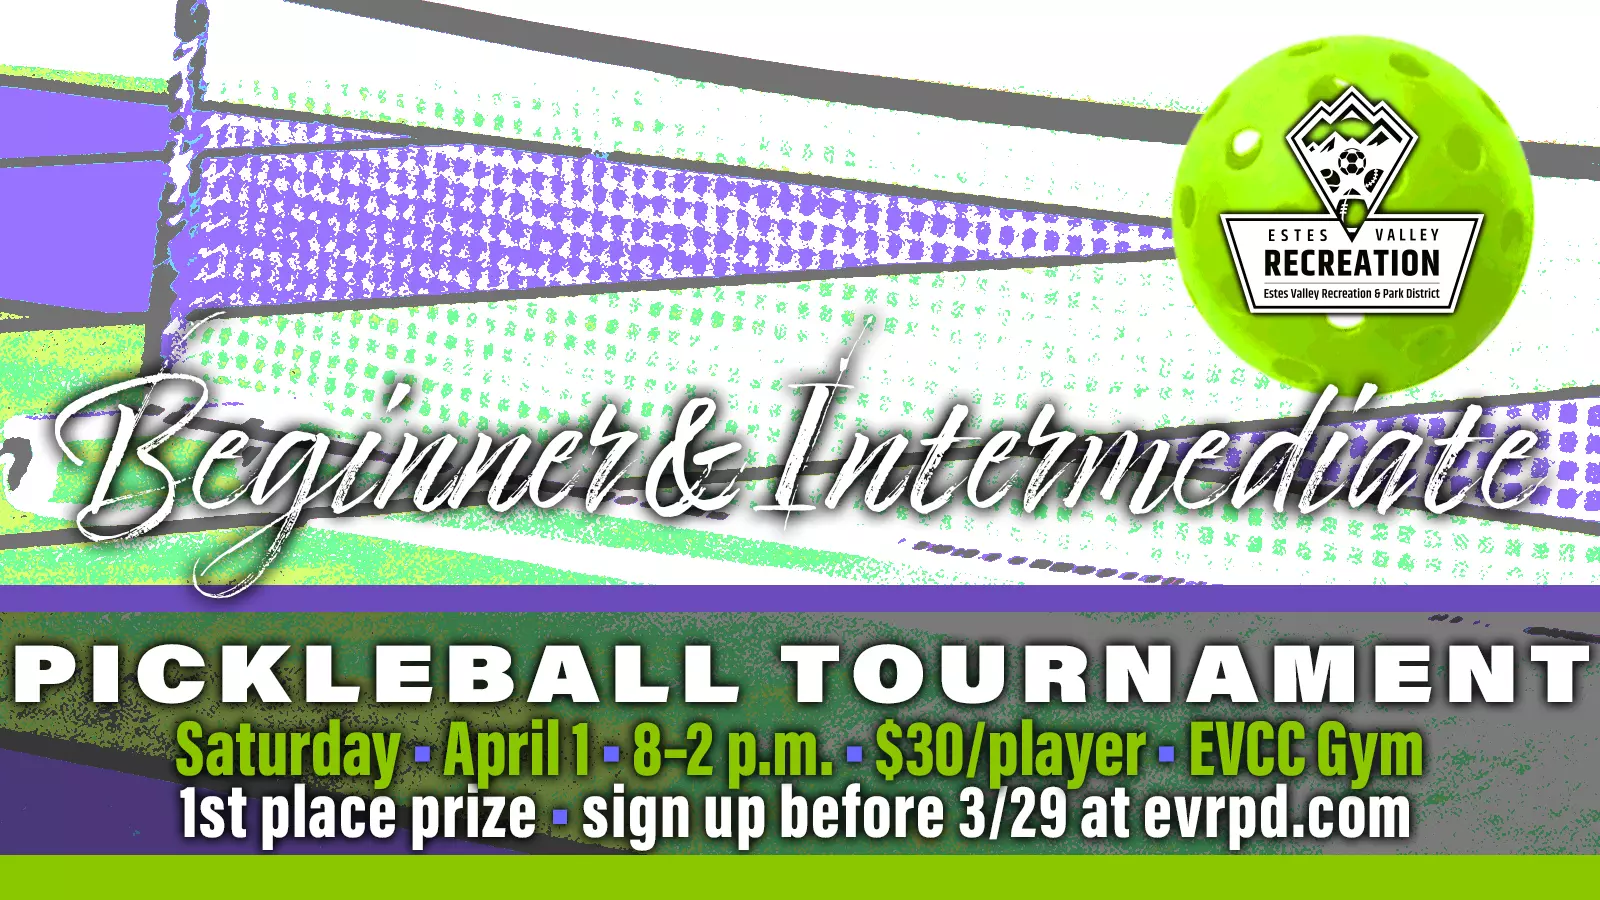 Round Robin pickle ball tournament for beginner and intermediate players